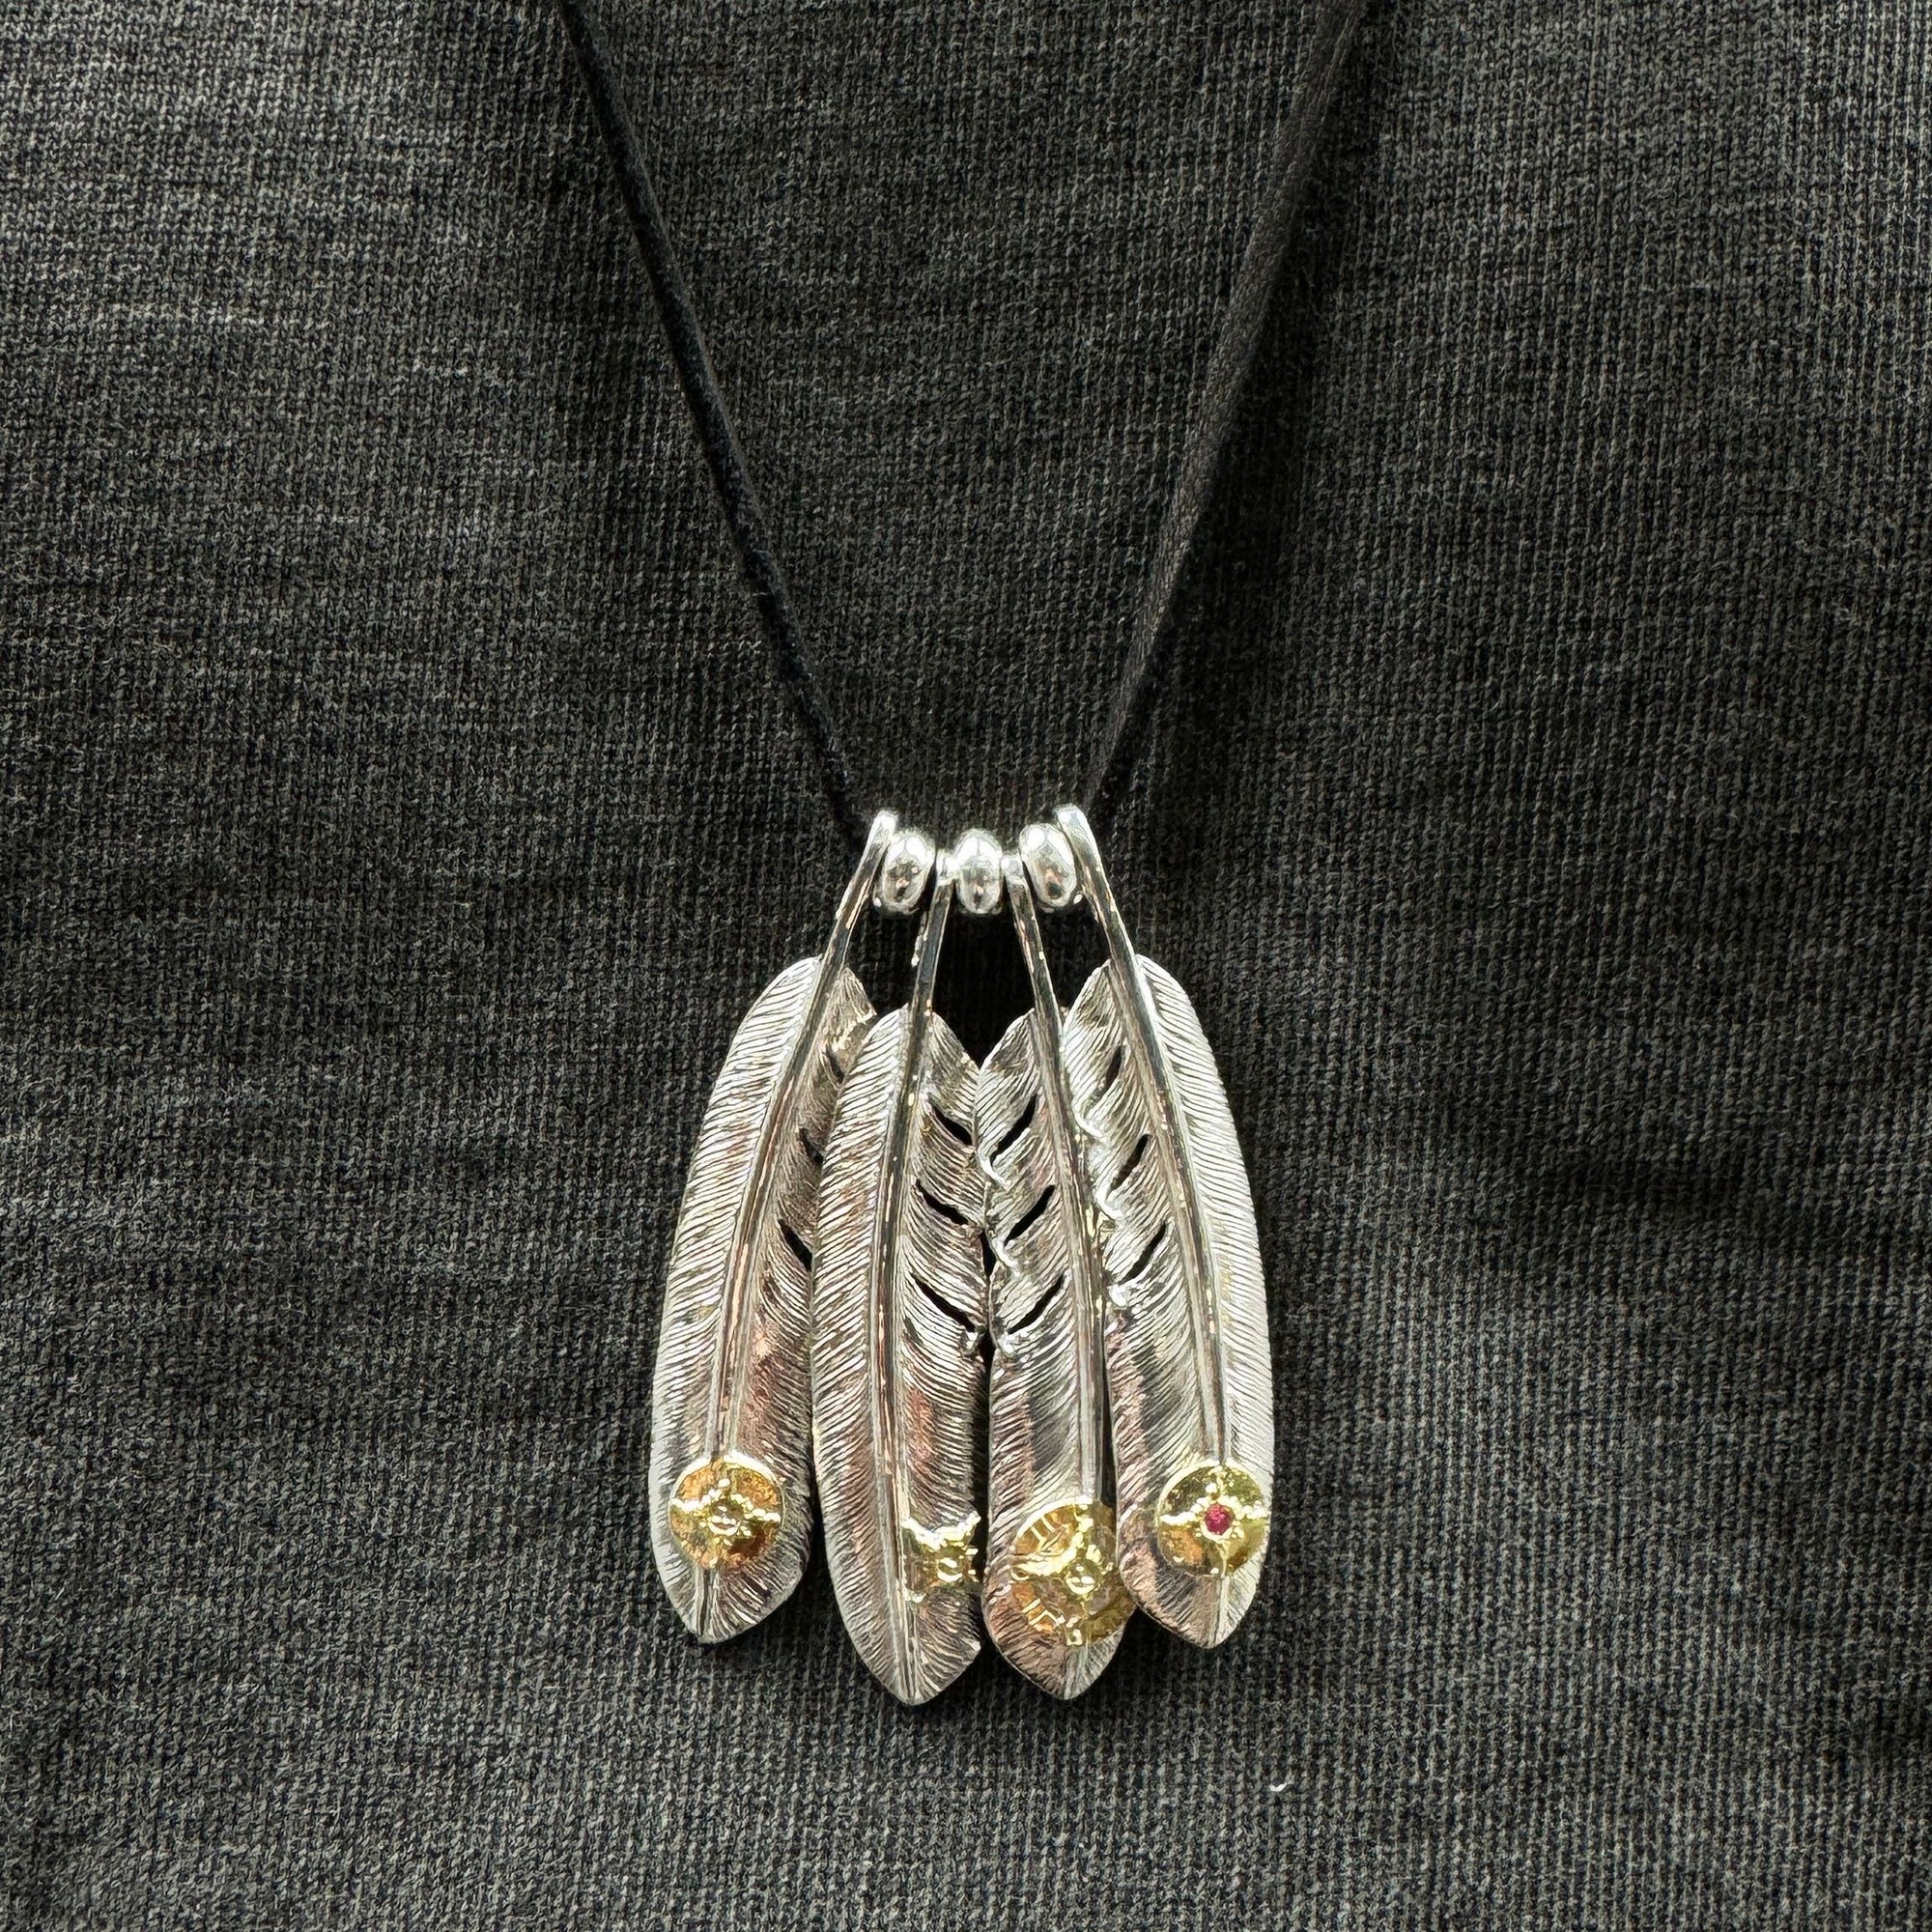 First Arrow's Silver ‘Large Feather’ Pendant with 18K Gold Emblem and Ruby (P-002J)